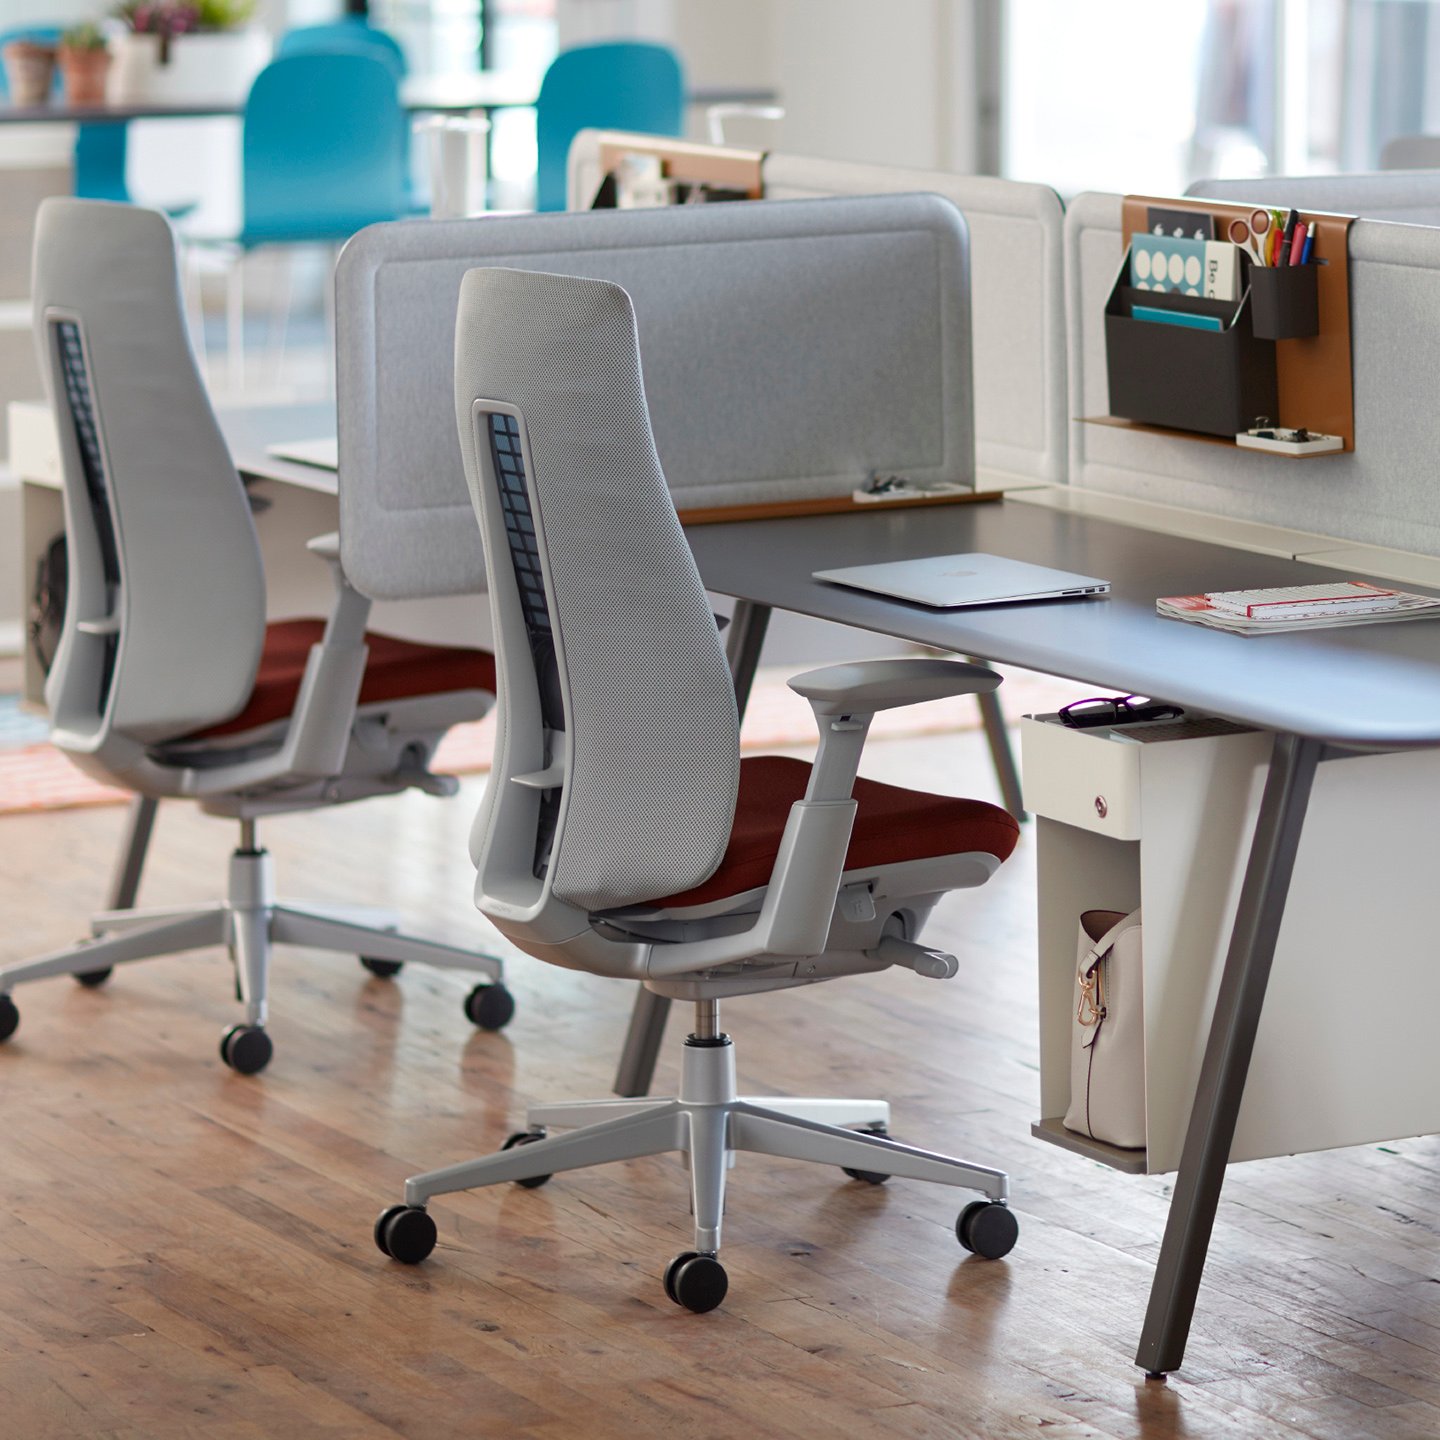 Haworth Fern task chair in grey color with Intuity benching in a office space